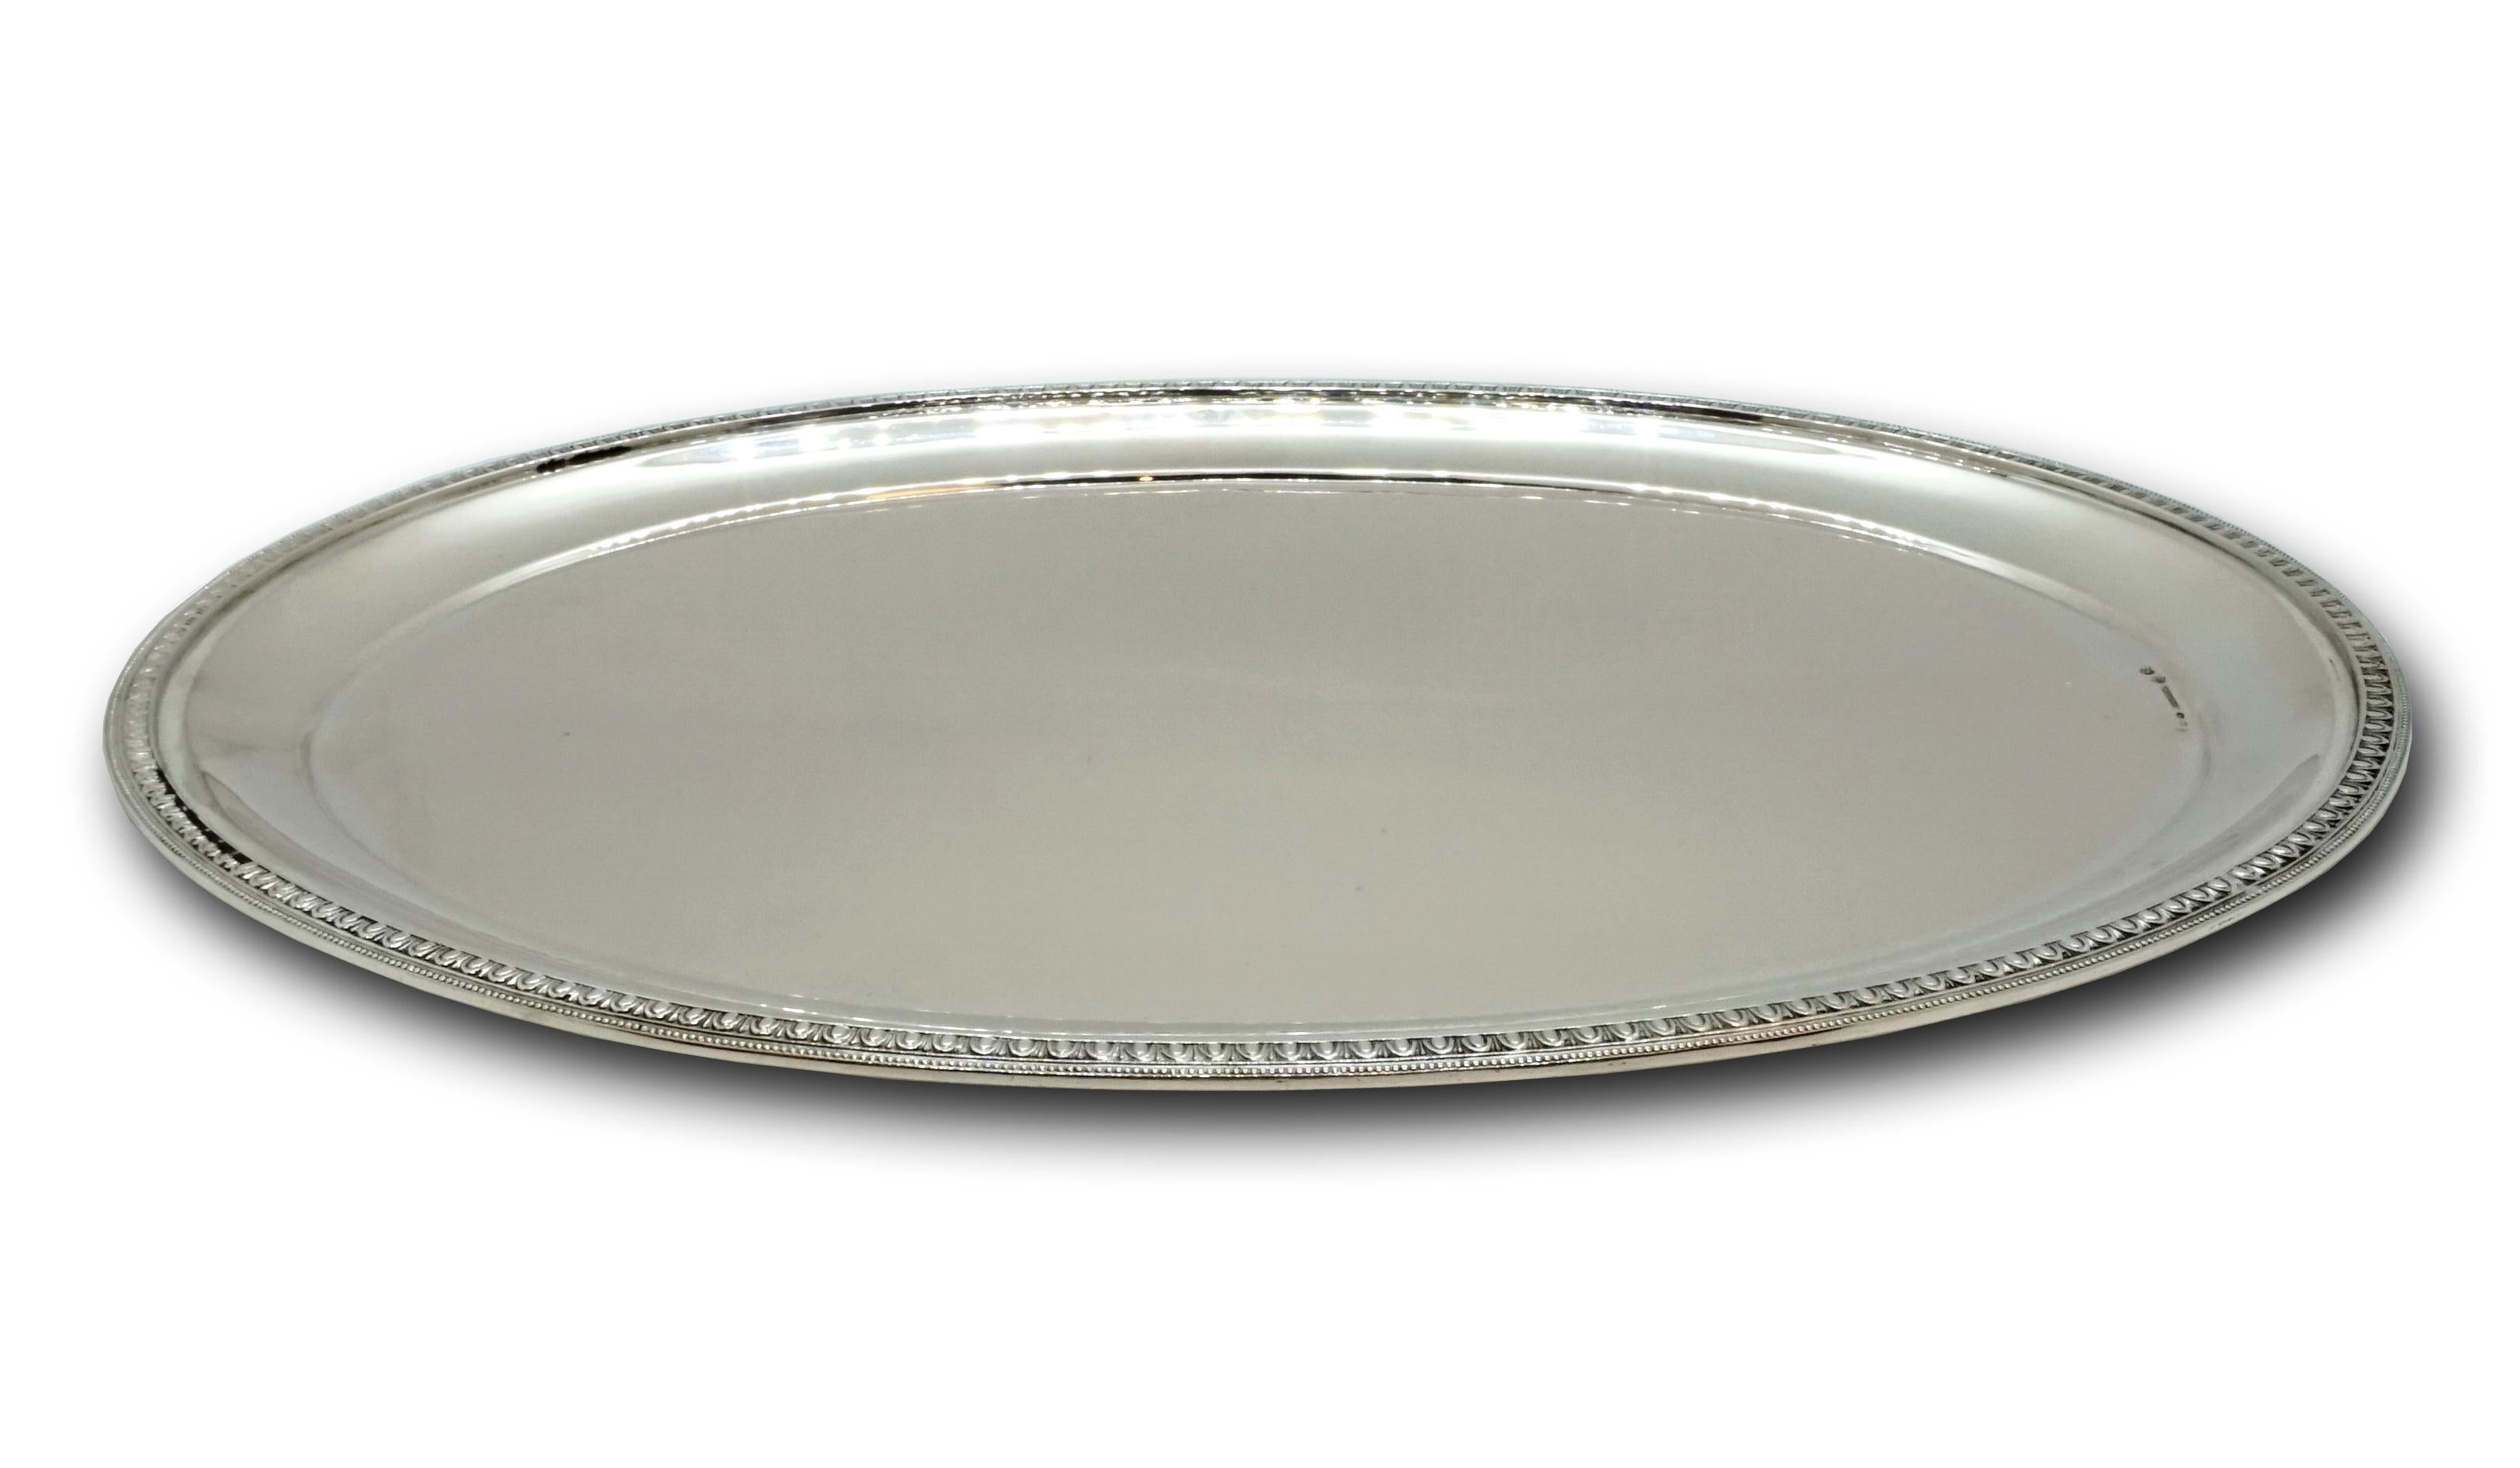 Oval shaped silver plate with egg stick decoration on the edge.

Branded by the Toucan head mark, the Viennese official hallmark 
1922-1939 and from 1946 for 800 silver

SCHWARZ & STEINER: Distributor
Master's sign: 'RS' for 'Rudolf